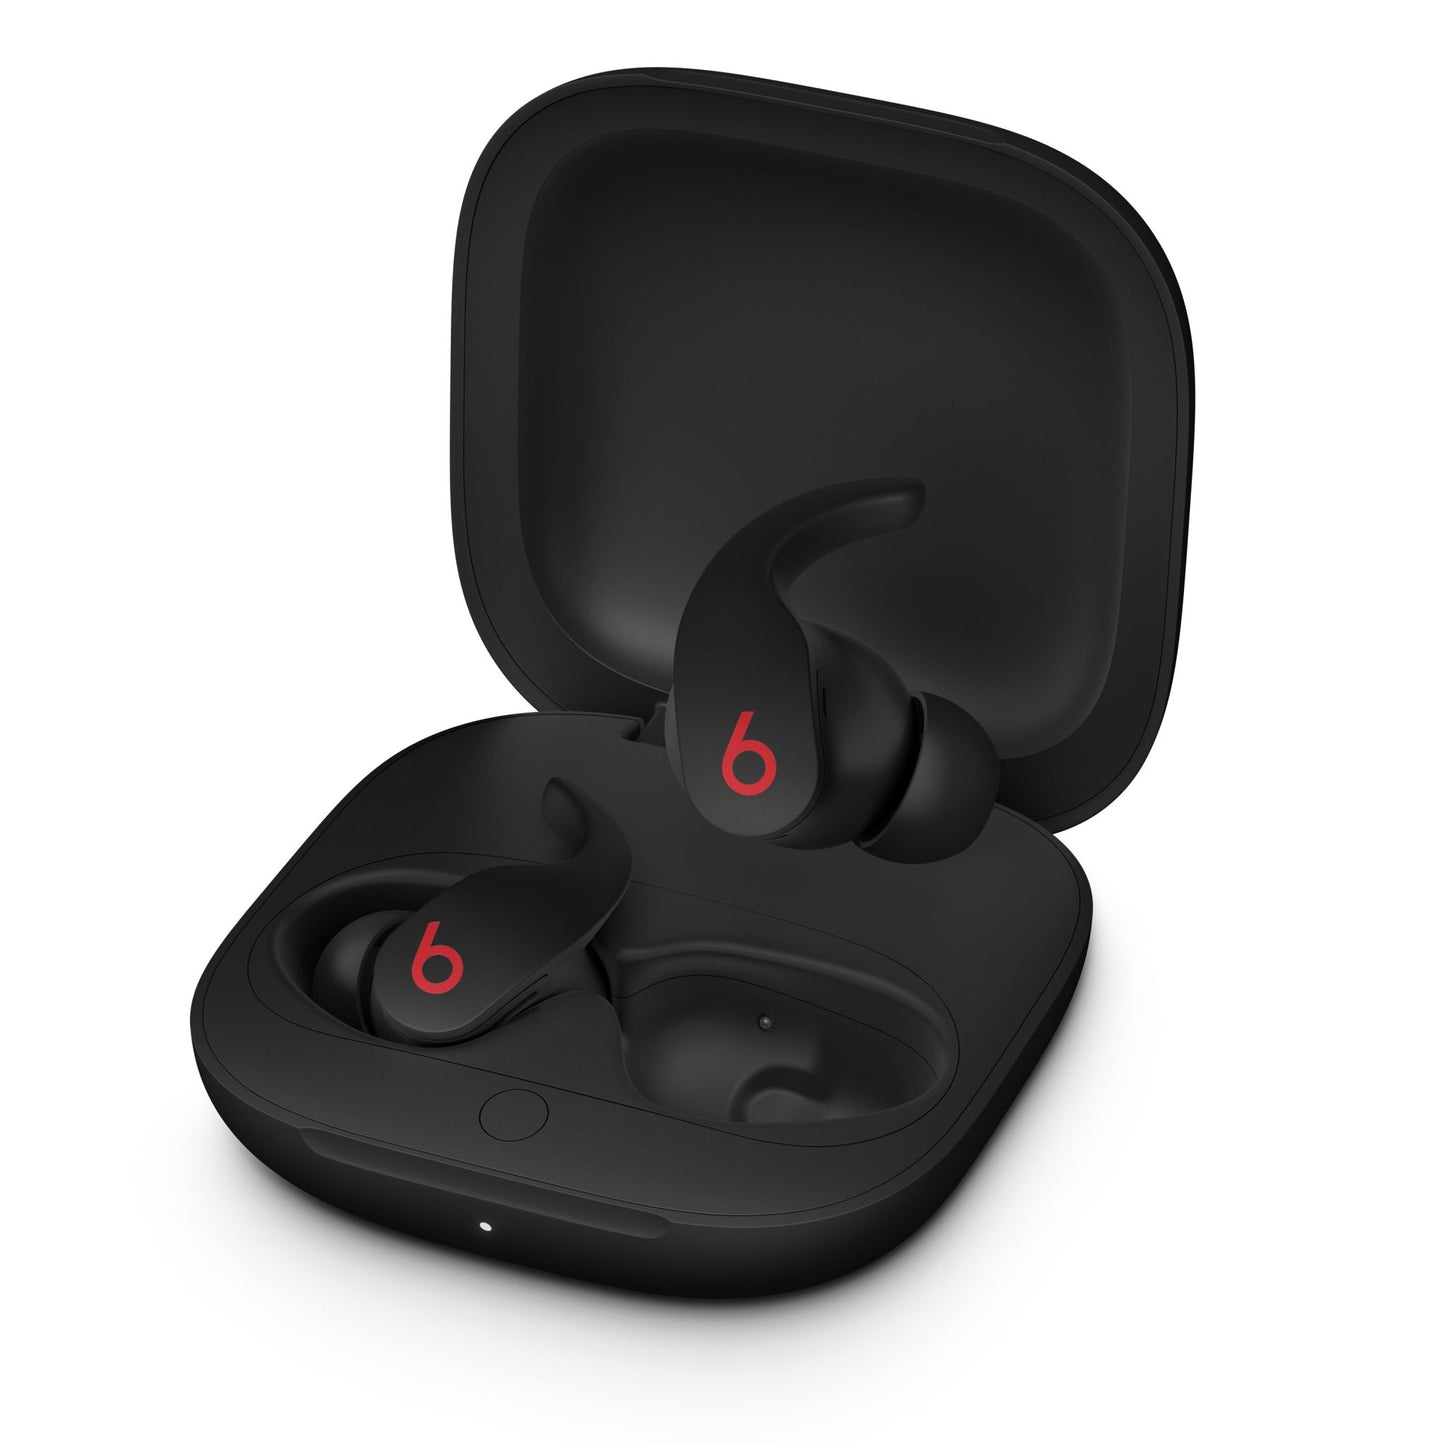 Beats by Dr. Dre Fit Pro Headset Wireless In-ear Calls/Music Bluetooth Black